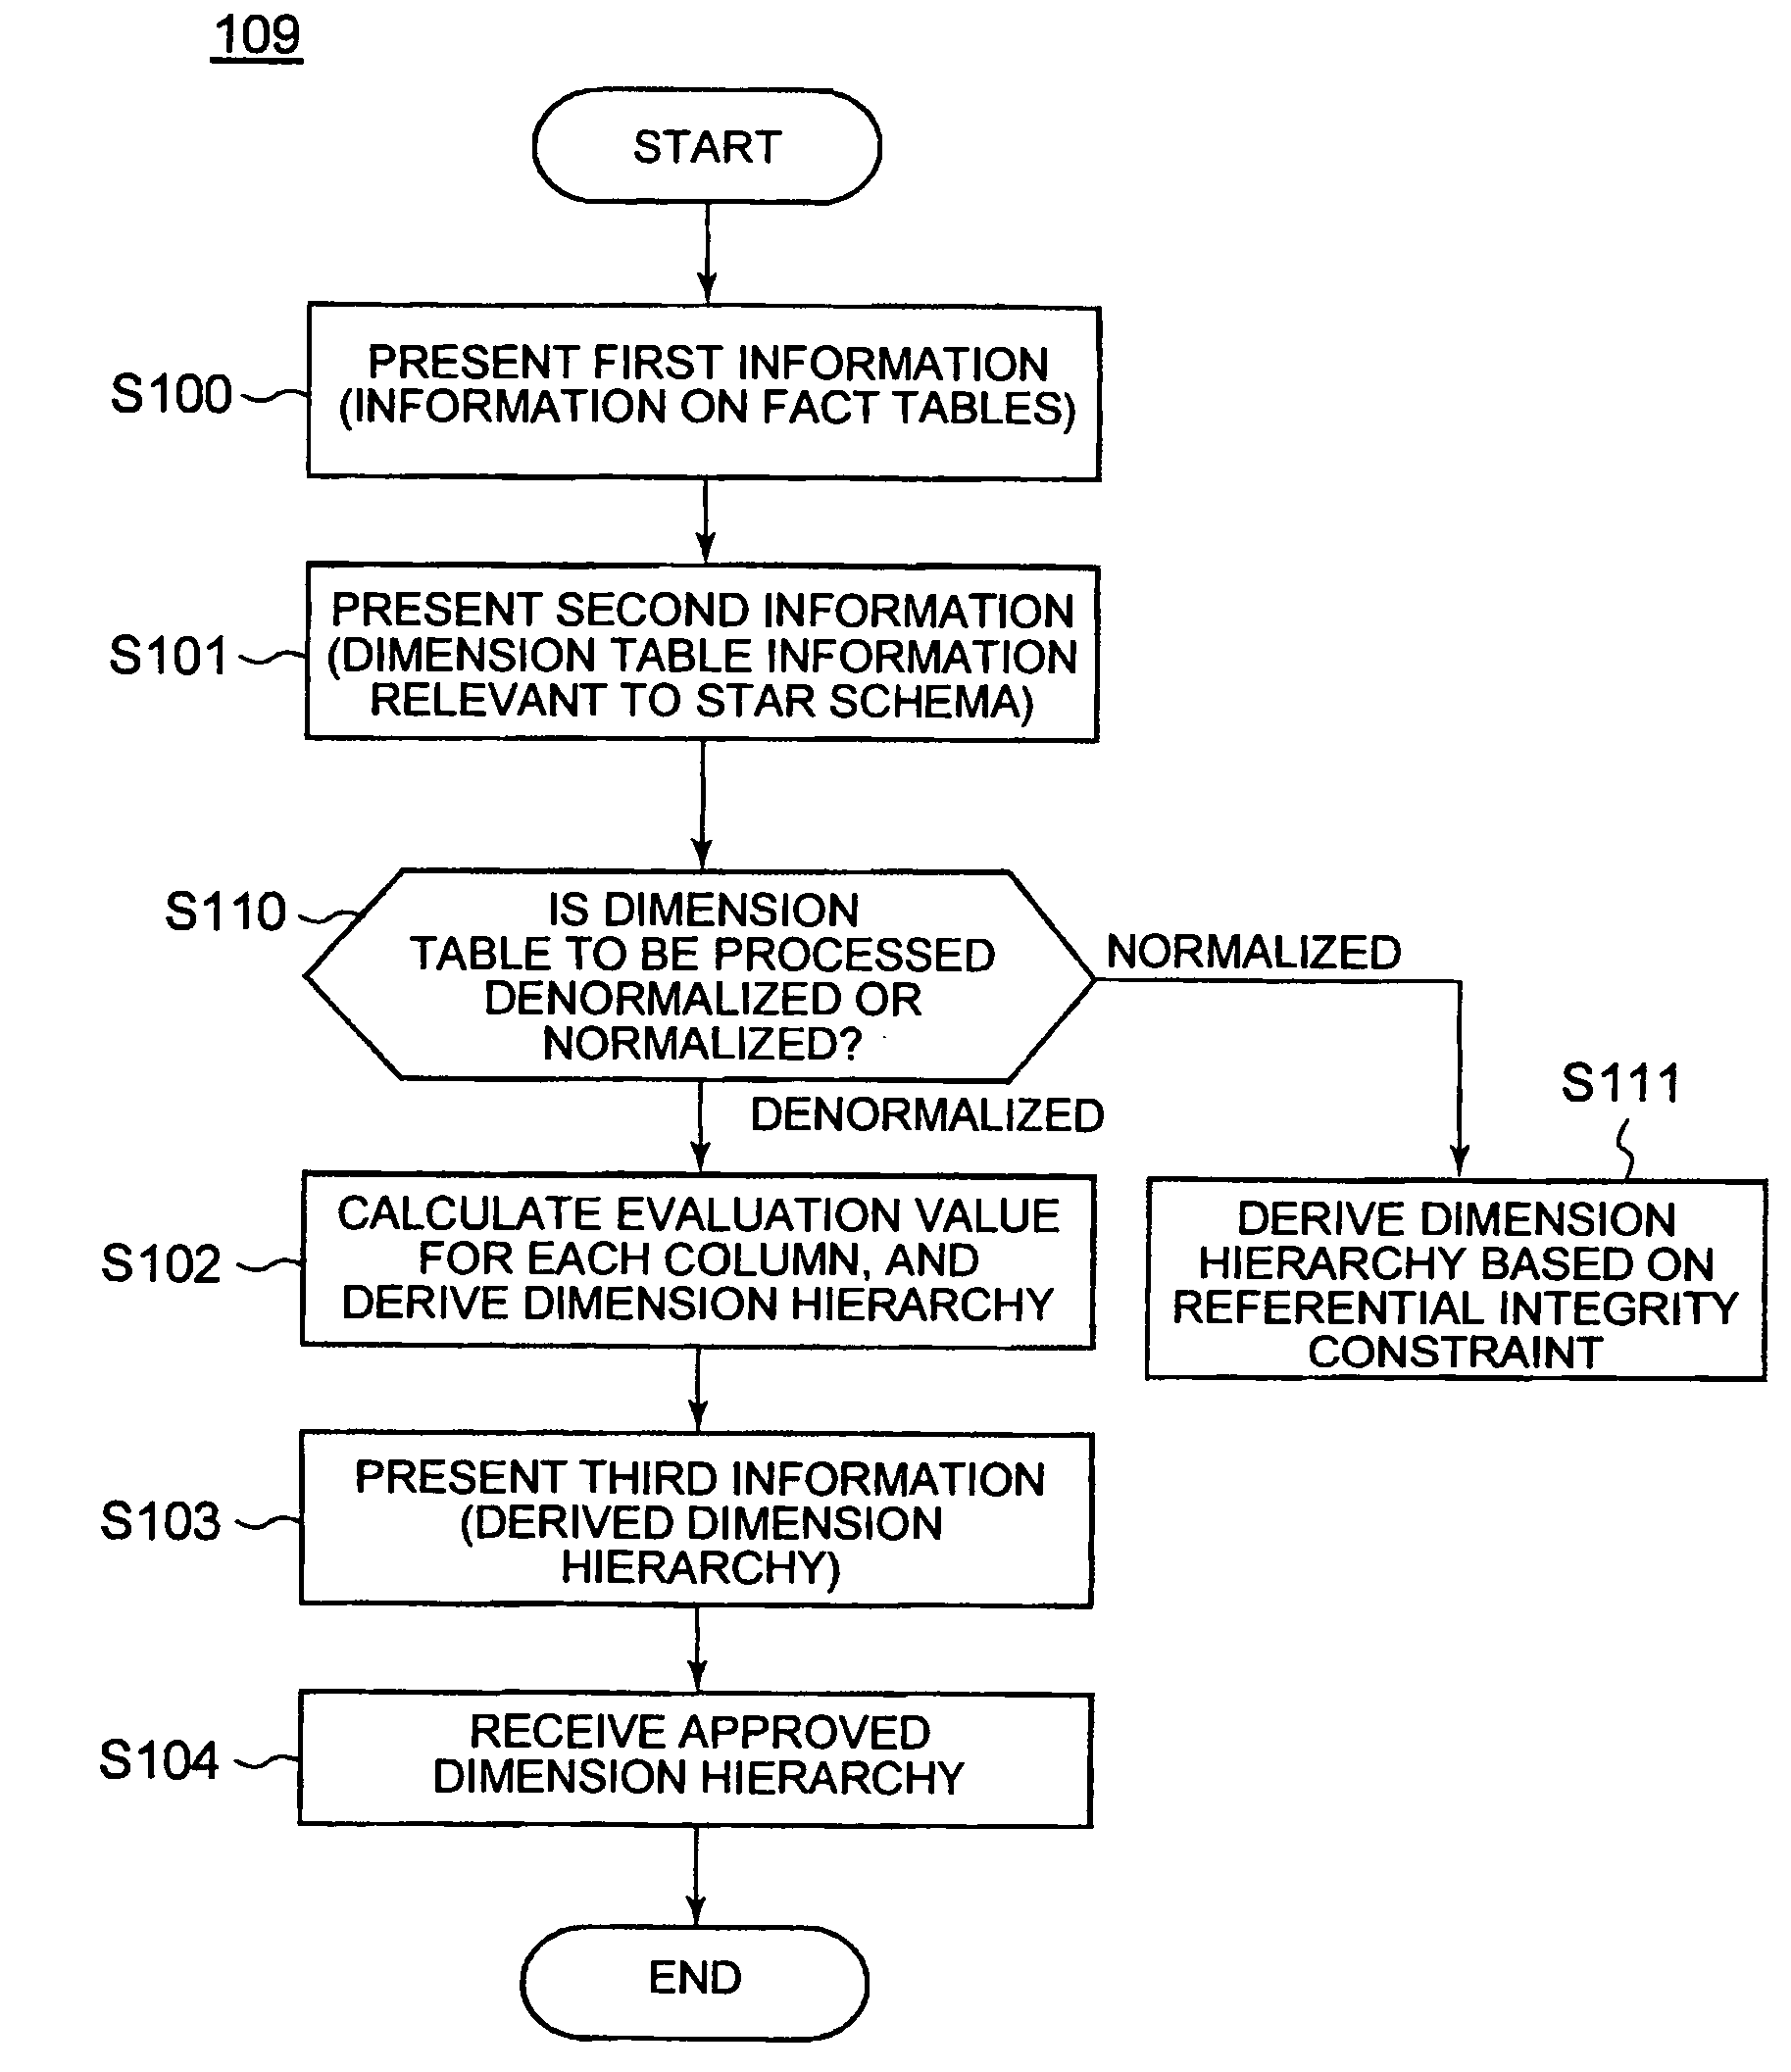 Method and apparatus for processing a dimension table and deriving a hierarchy therefrom